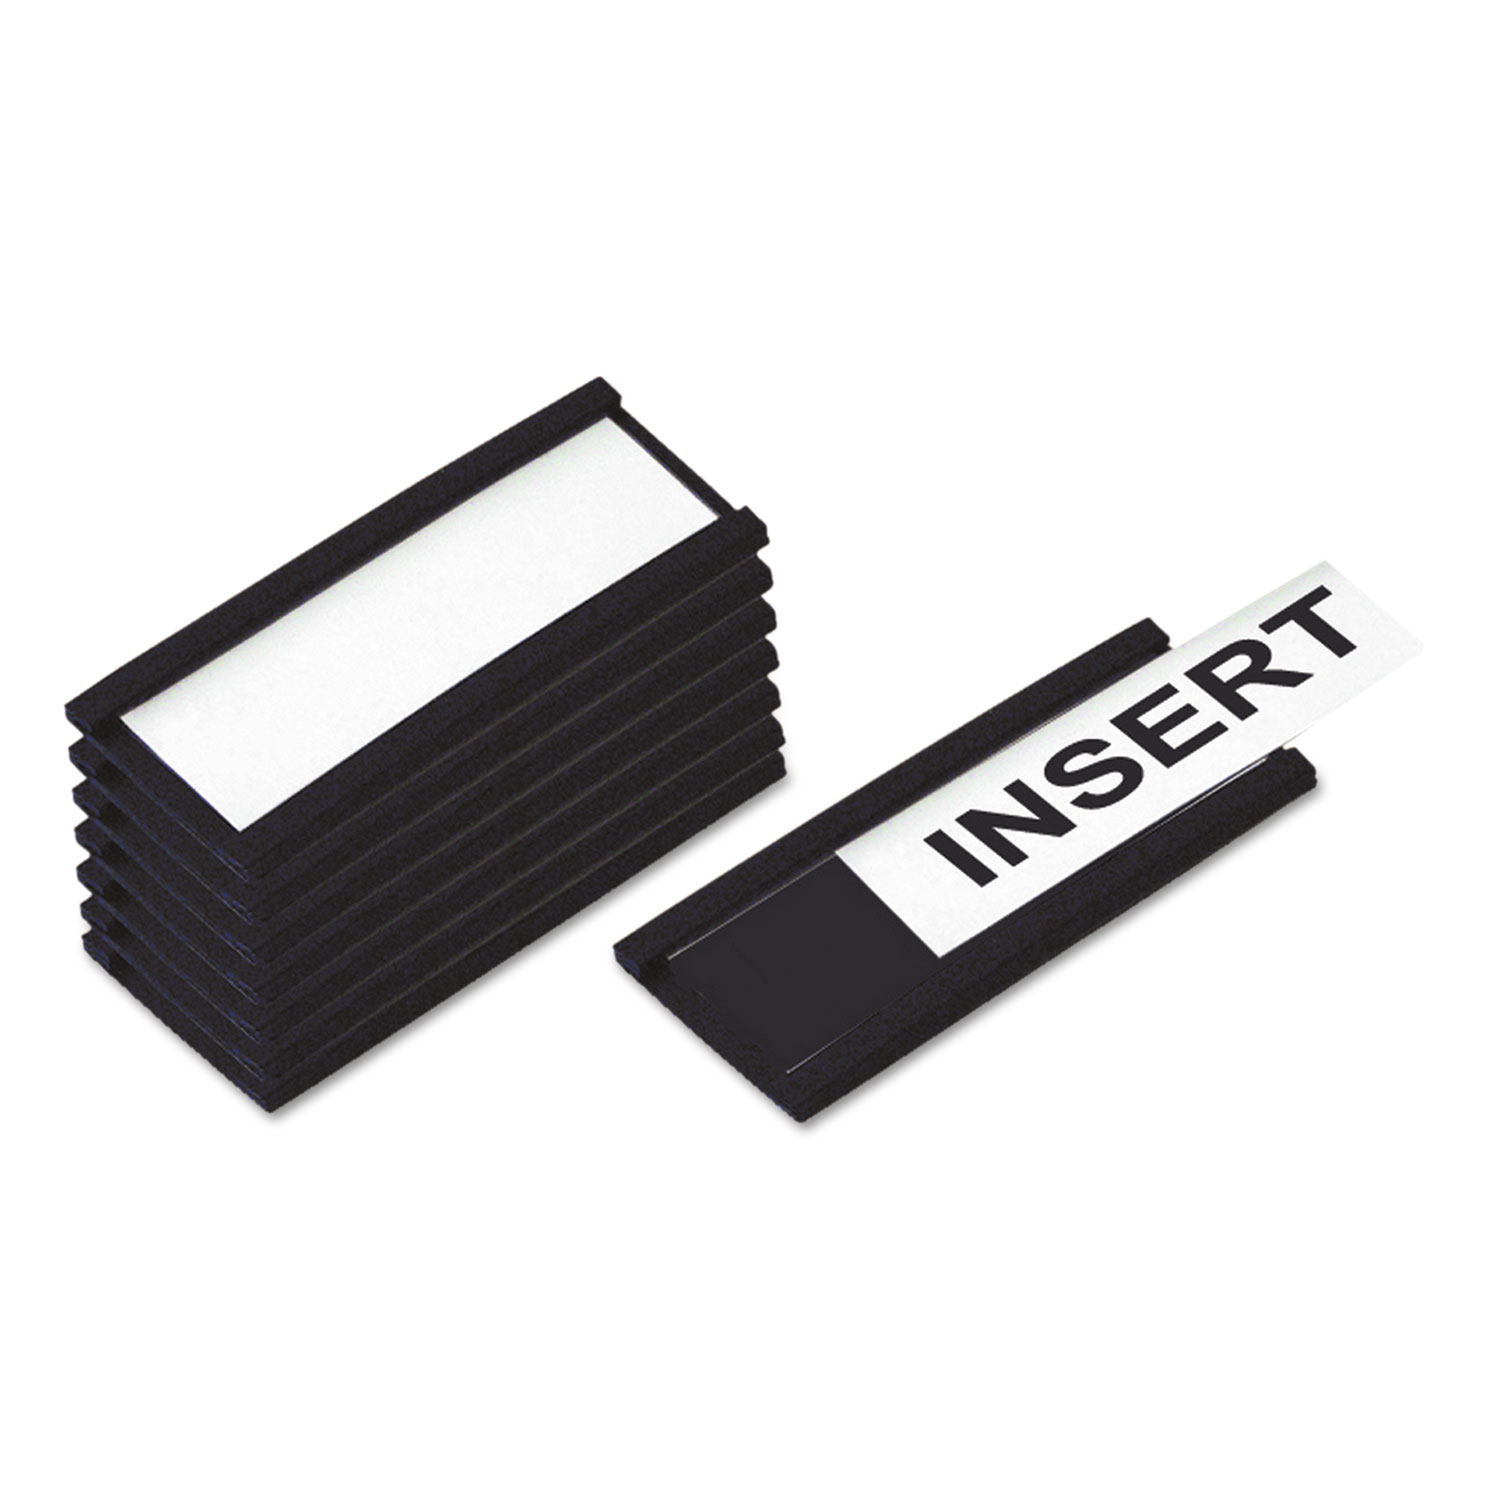  MasterVision FM1310 Magnetic Card Holders, 2w x 1h, Black, 25/Pack (BVCFM1310) 